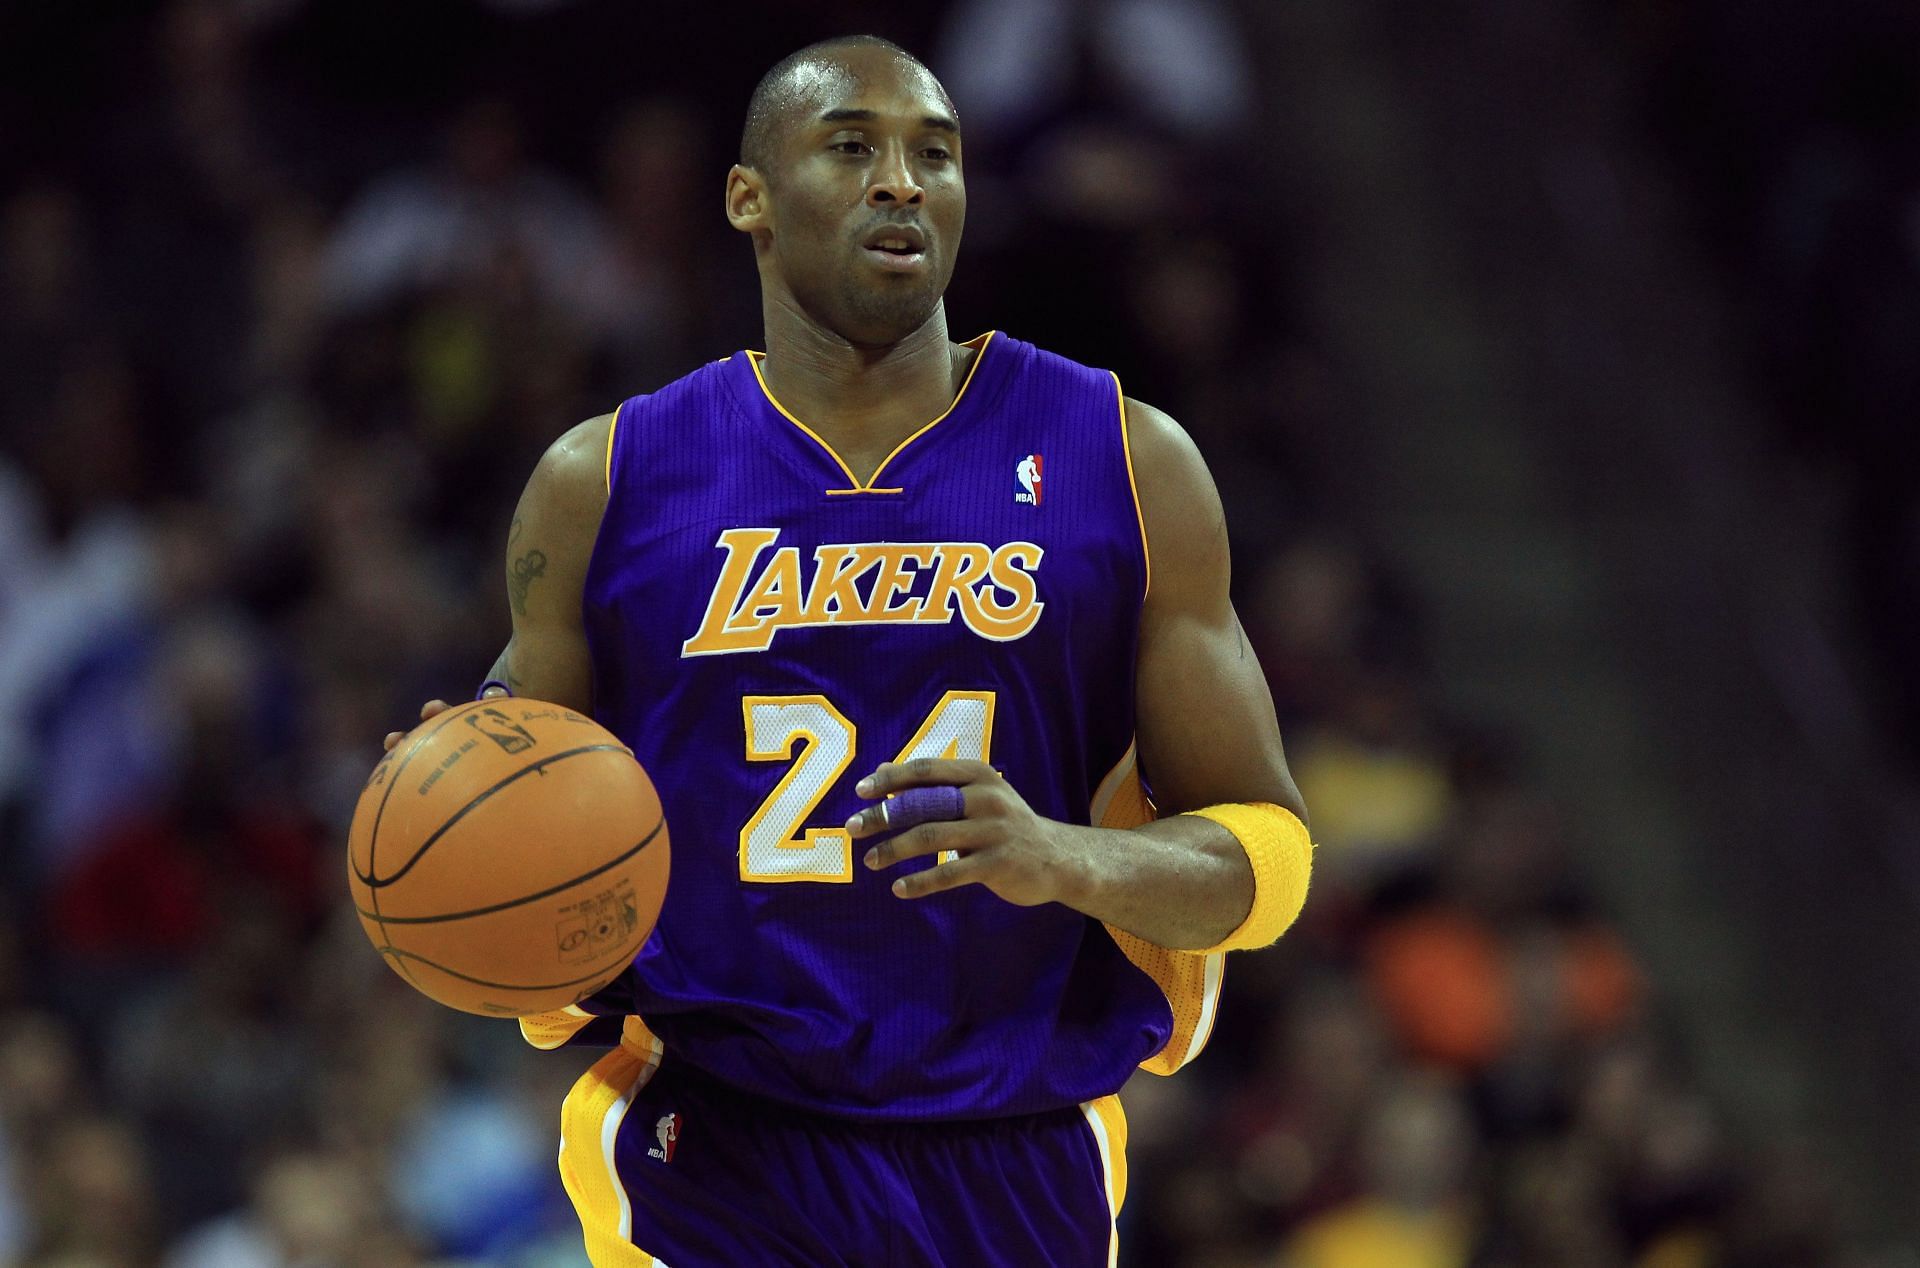 Will LeBron James' move to L.A. make him and Kobe Bryant rival